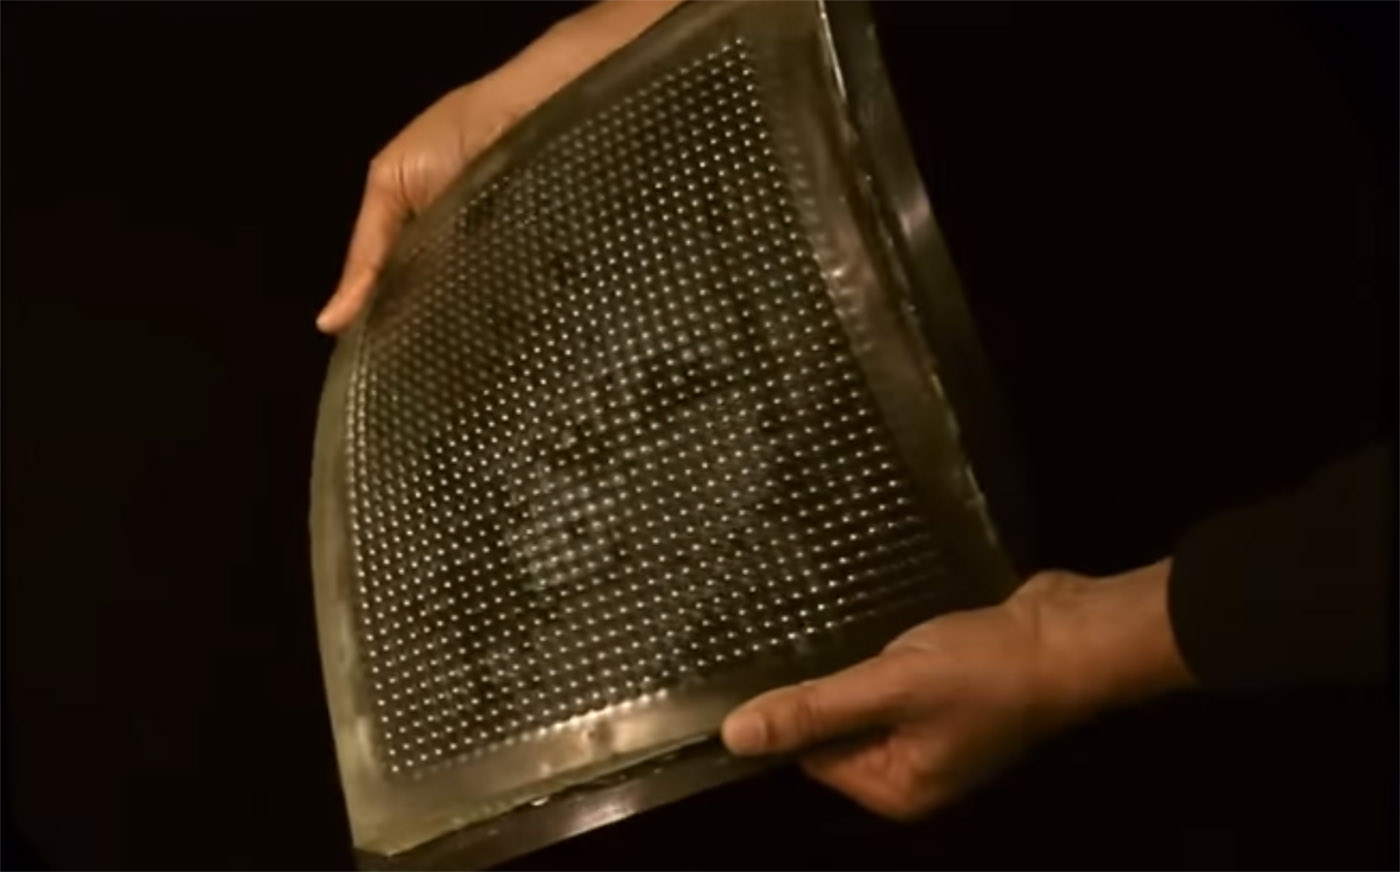 Flexible lens sheets could change way cameras see